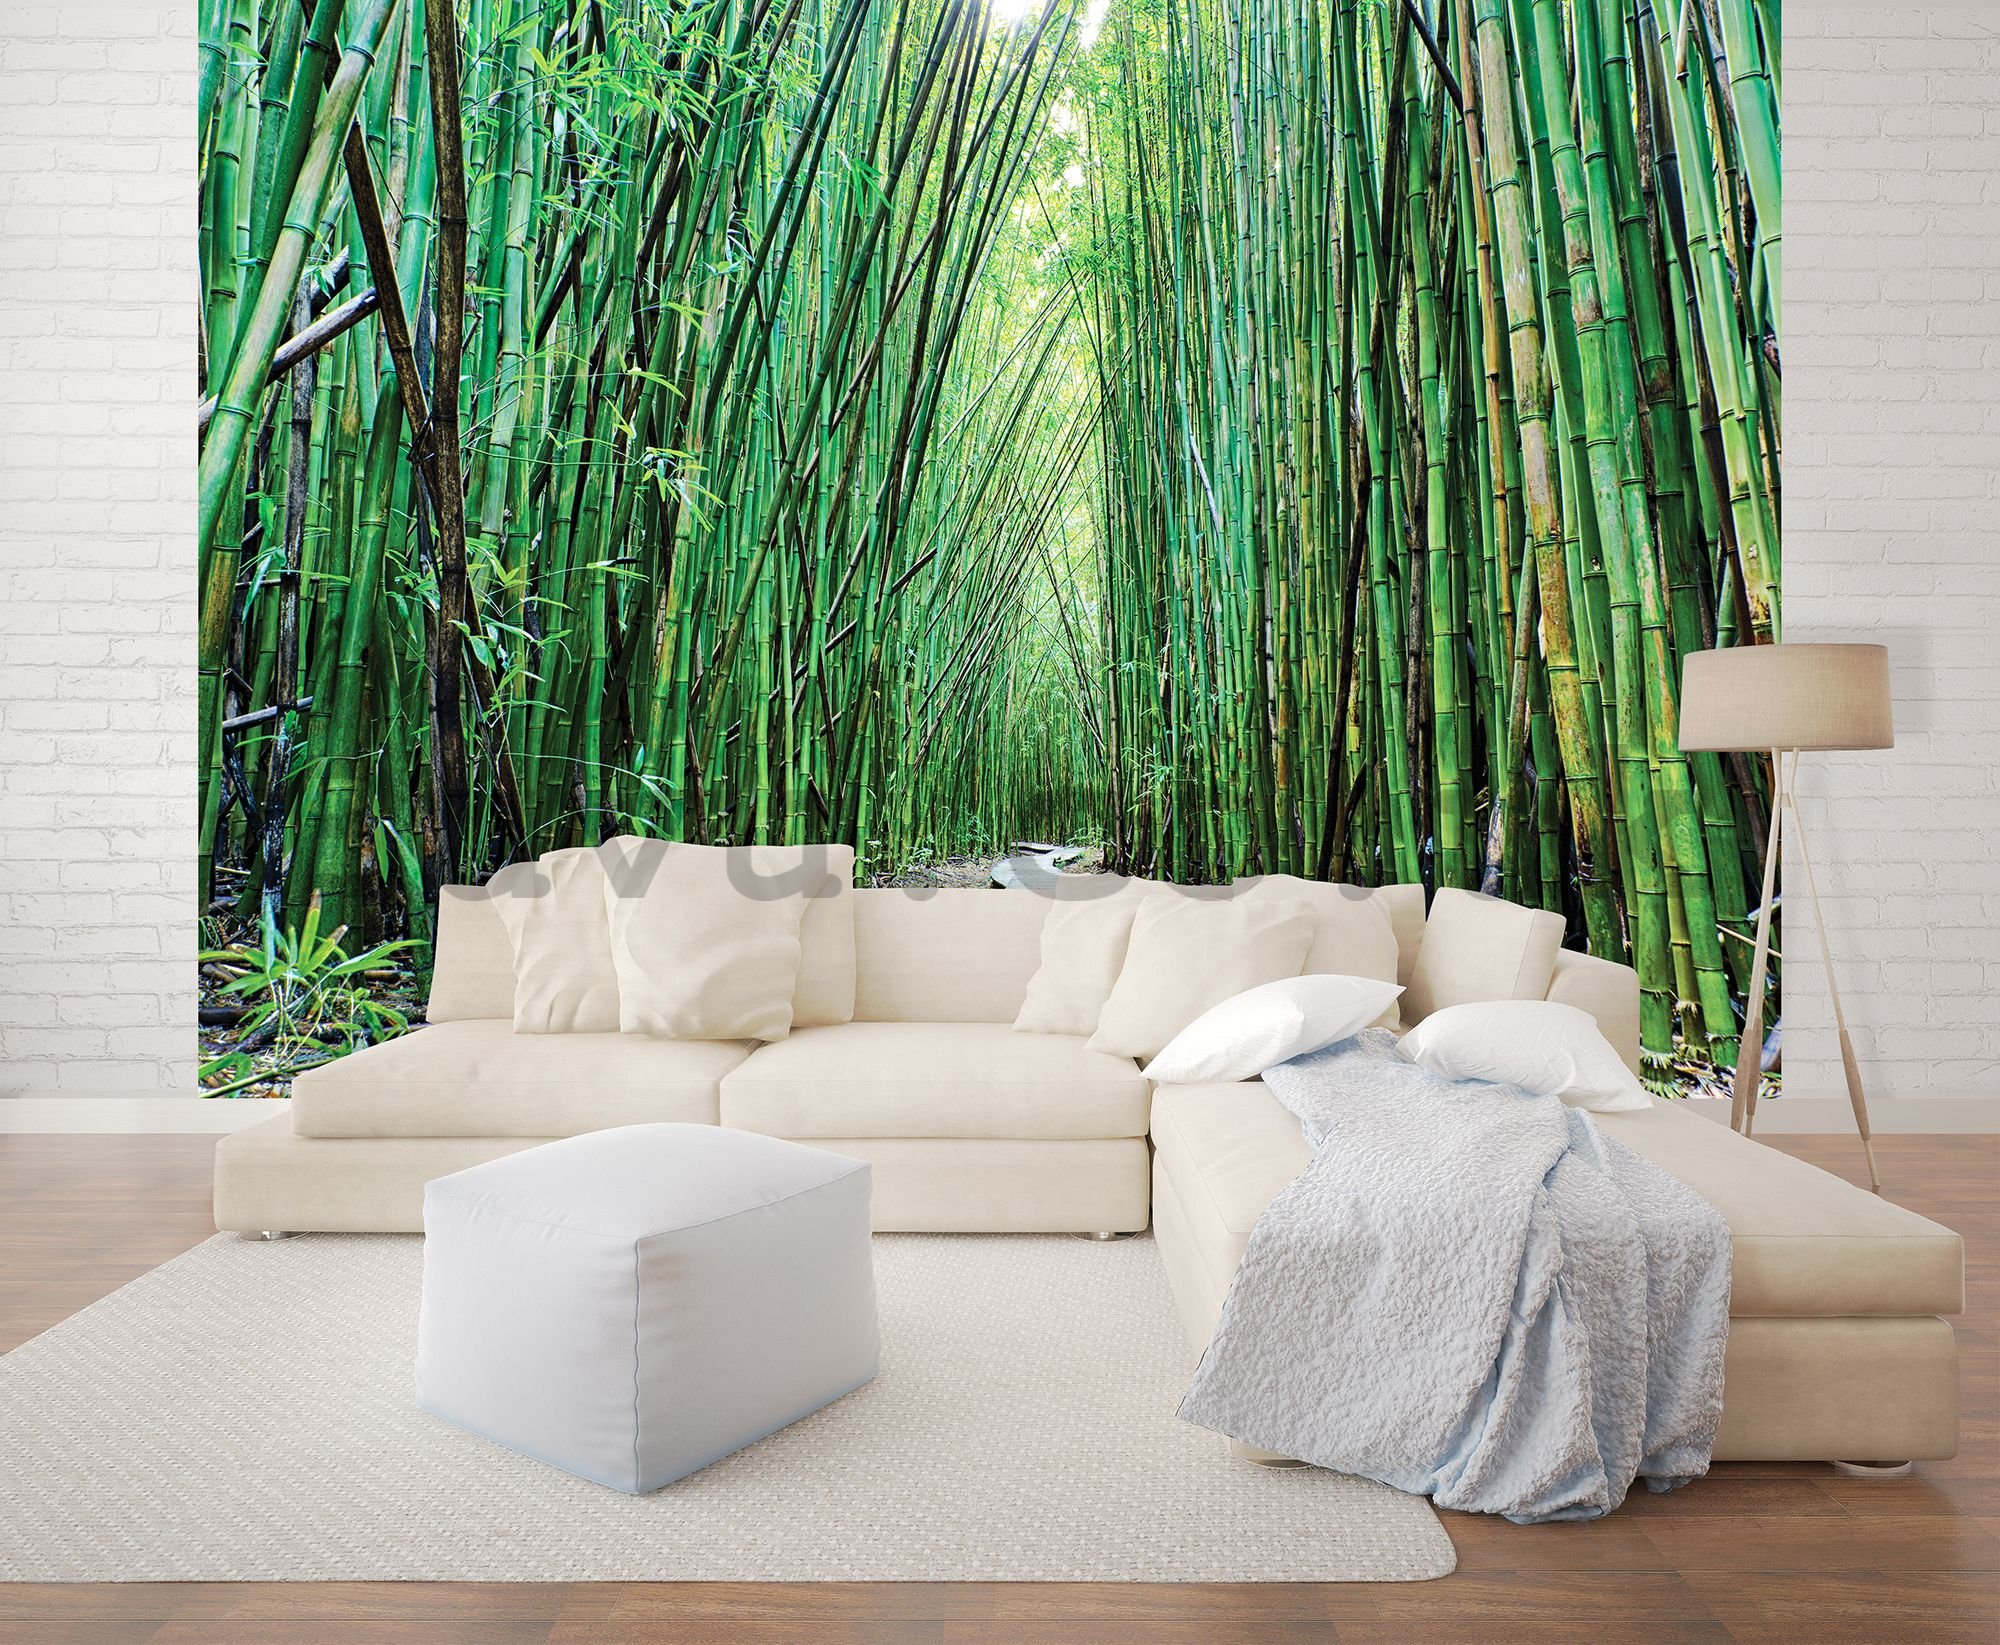 Wall mural: Bamboo forest (2) - 254x368 cm